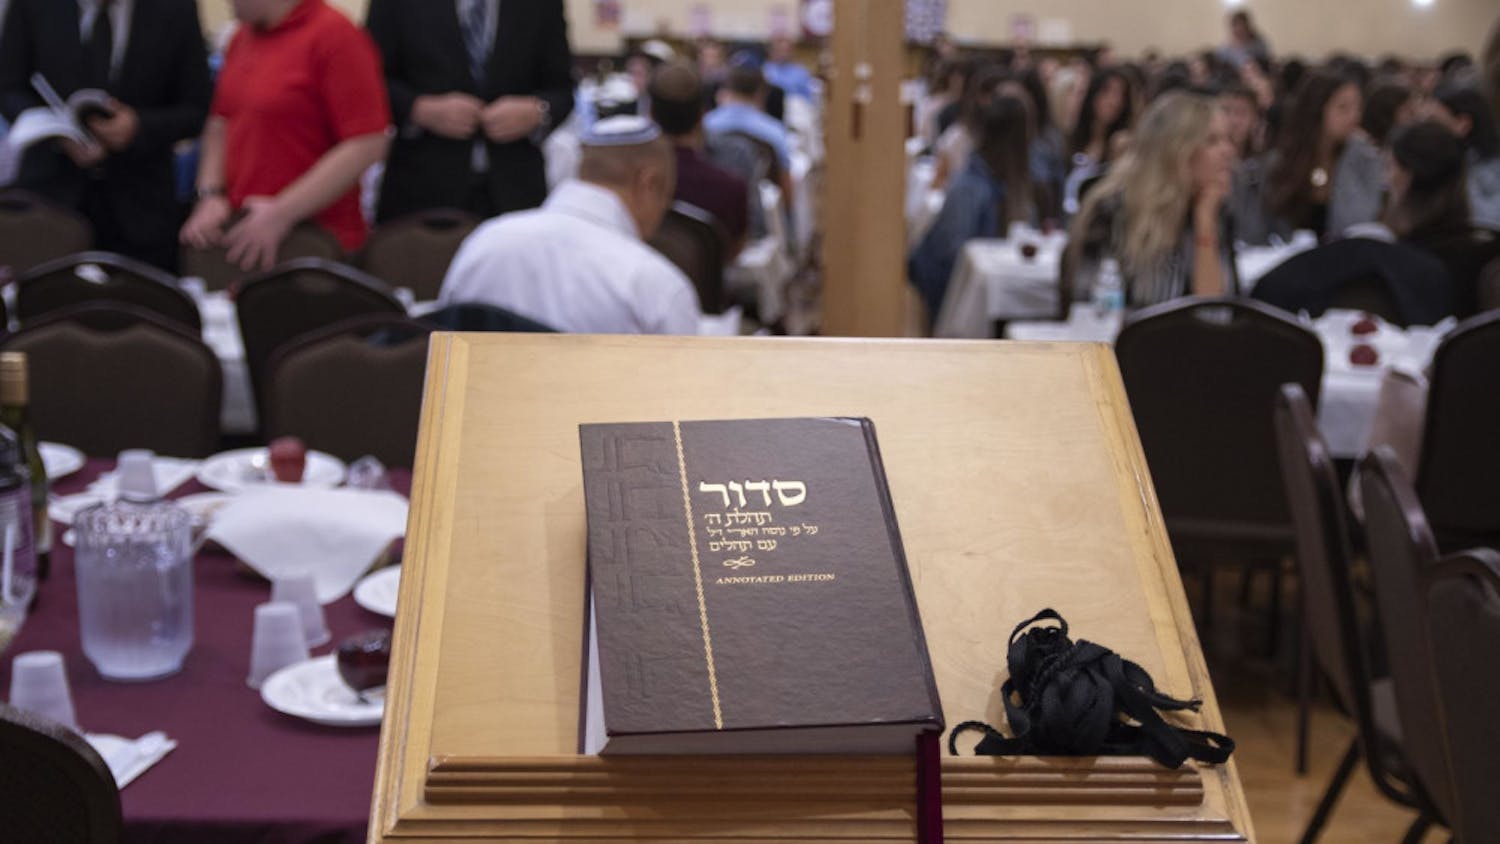 Prayer books are laid out at the Lubavitch Chabad Jewish Student and Community Center for the Rosh Hashanah service. Around 650 members of the community and students attended the holiday service Sunday night.